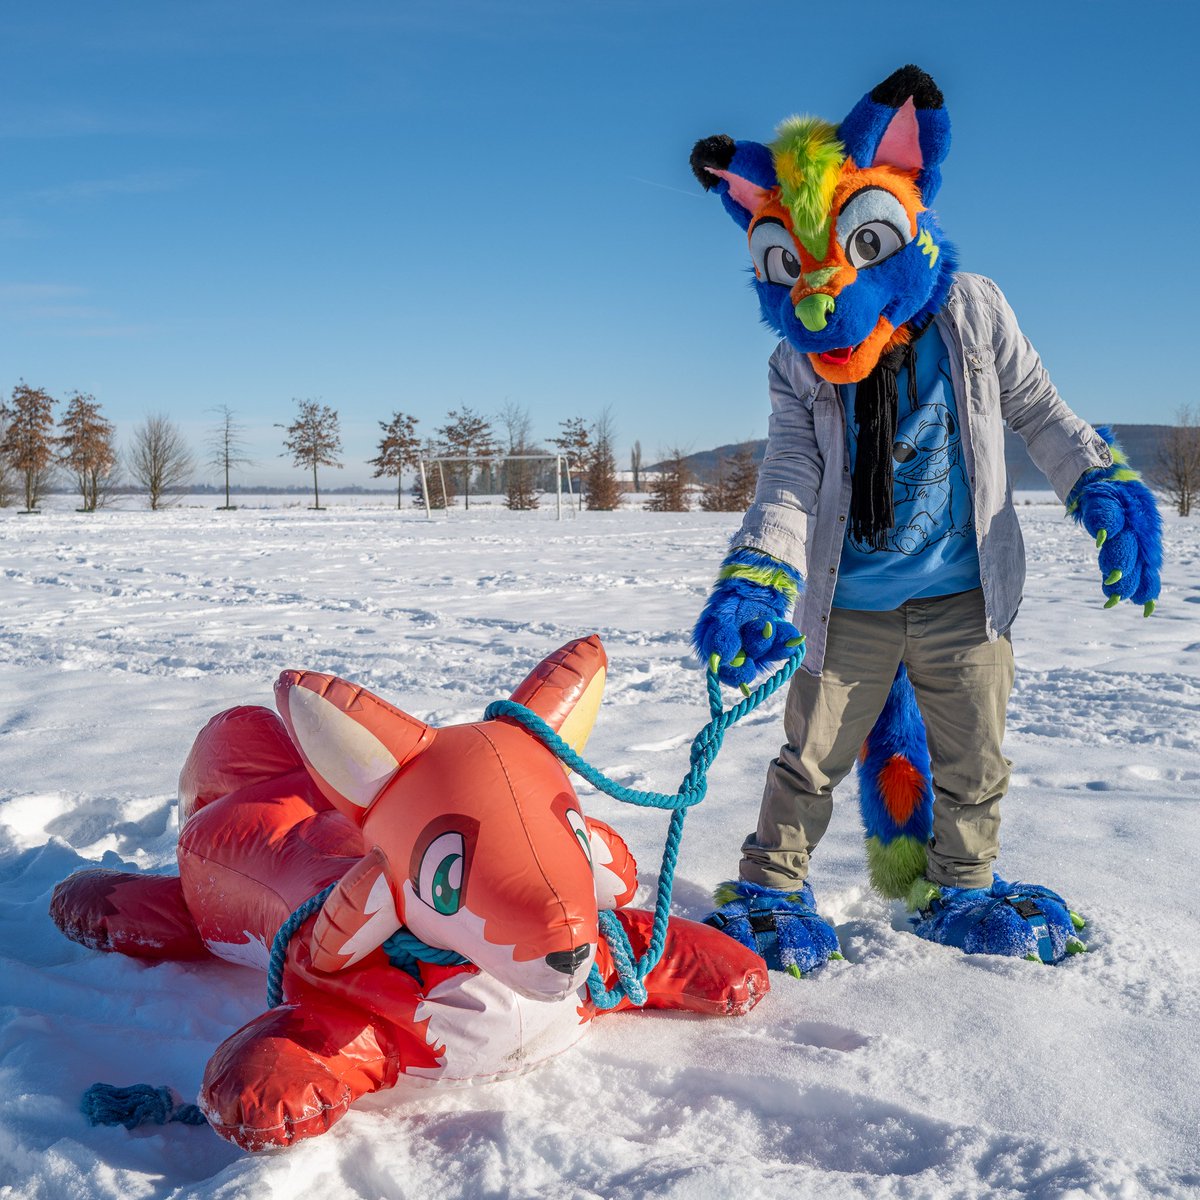 Before its to late for #SqueakySaturday I had a wonderful with Friends having fun in the Snow, me with the #inflatable Fox by #inflatableworld as Sledge ^^ #Furry #Fursuit #Squeak #inflafur Pics by @Darknetic2